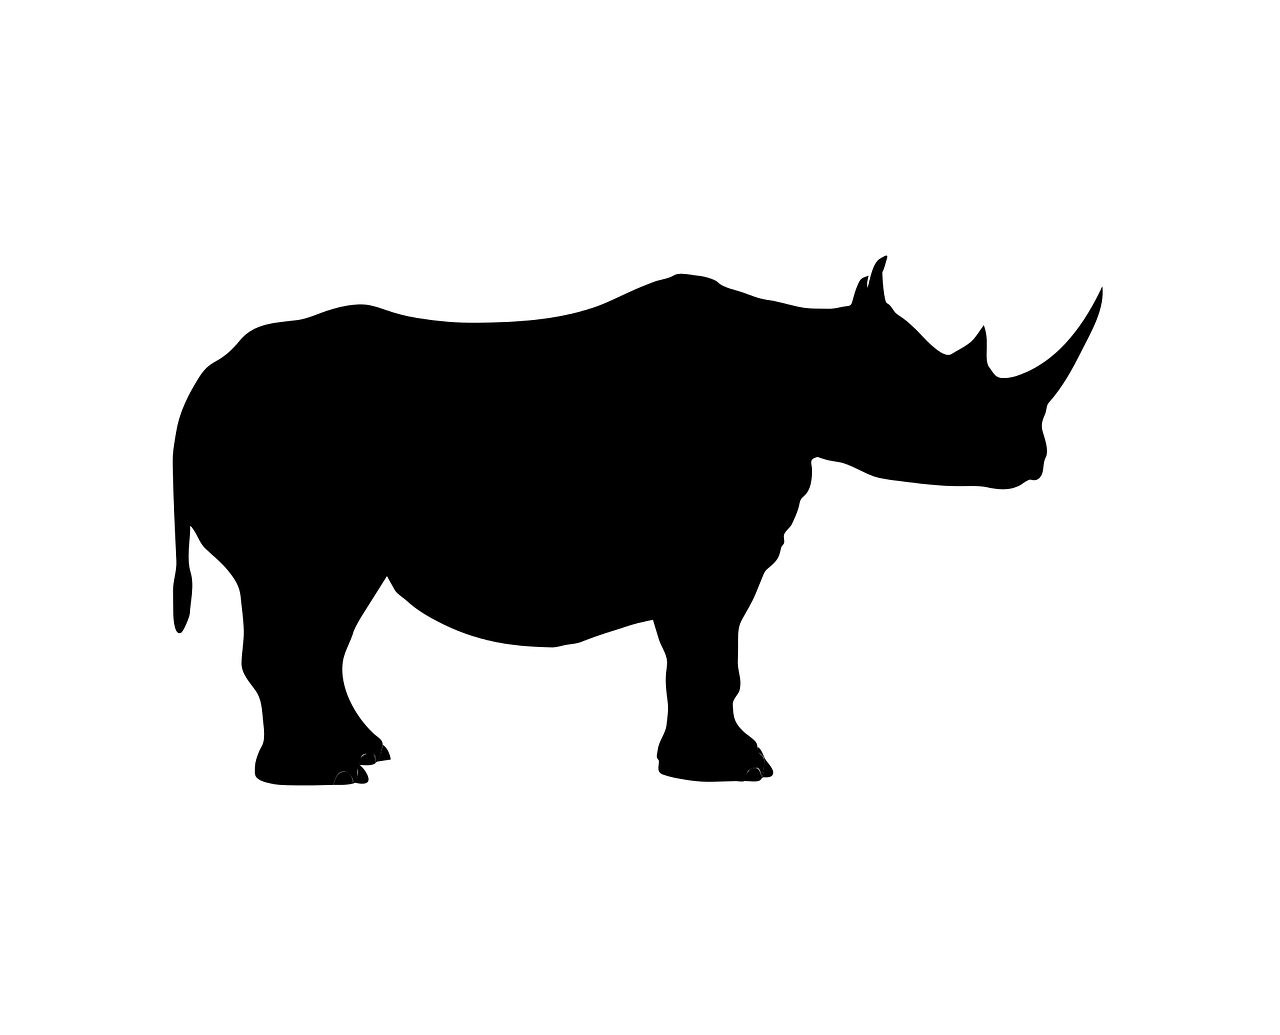 a silhouette of a rhino on a white background, an illustration of, by Jan Zrzavý, hurufiyya, large horned tail, heavily exaggerated proportions, illustration”, zido